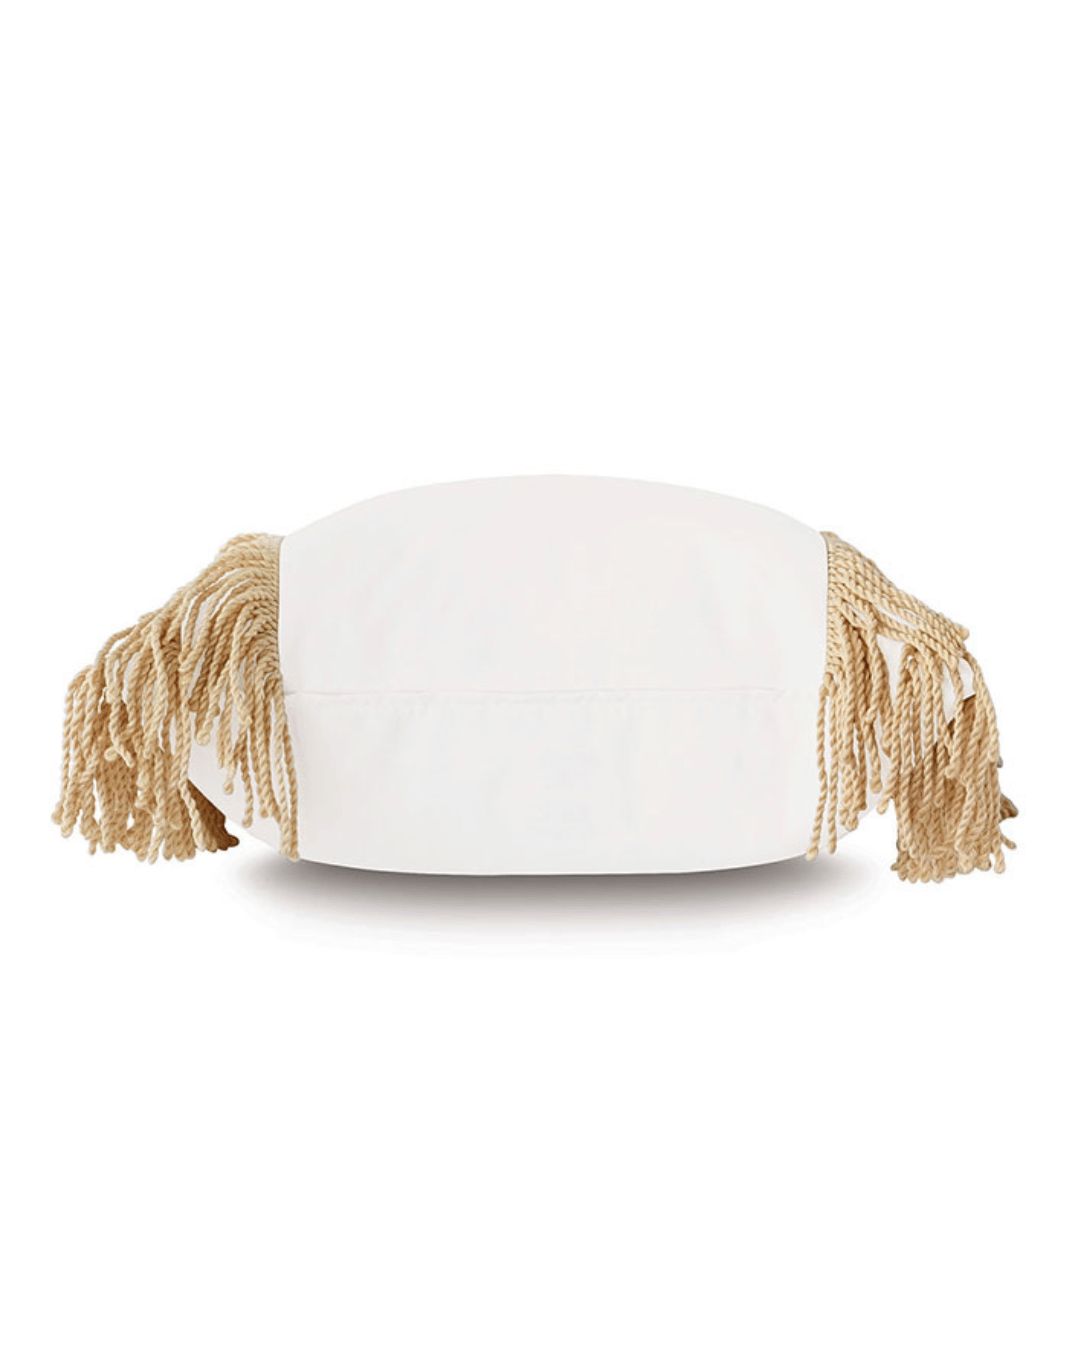 A decorative Paler Fringe Cloud Pillow from Eastern Accents with long, tasseled ends, isolated on a white background, exudes Bungalow style.